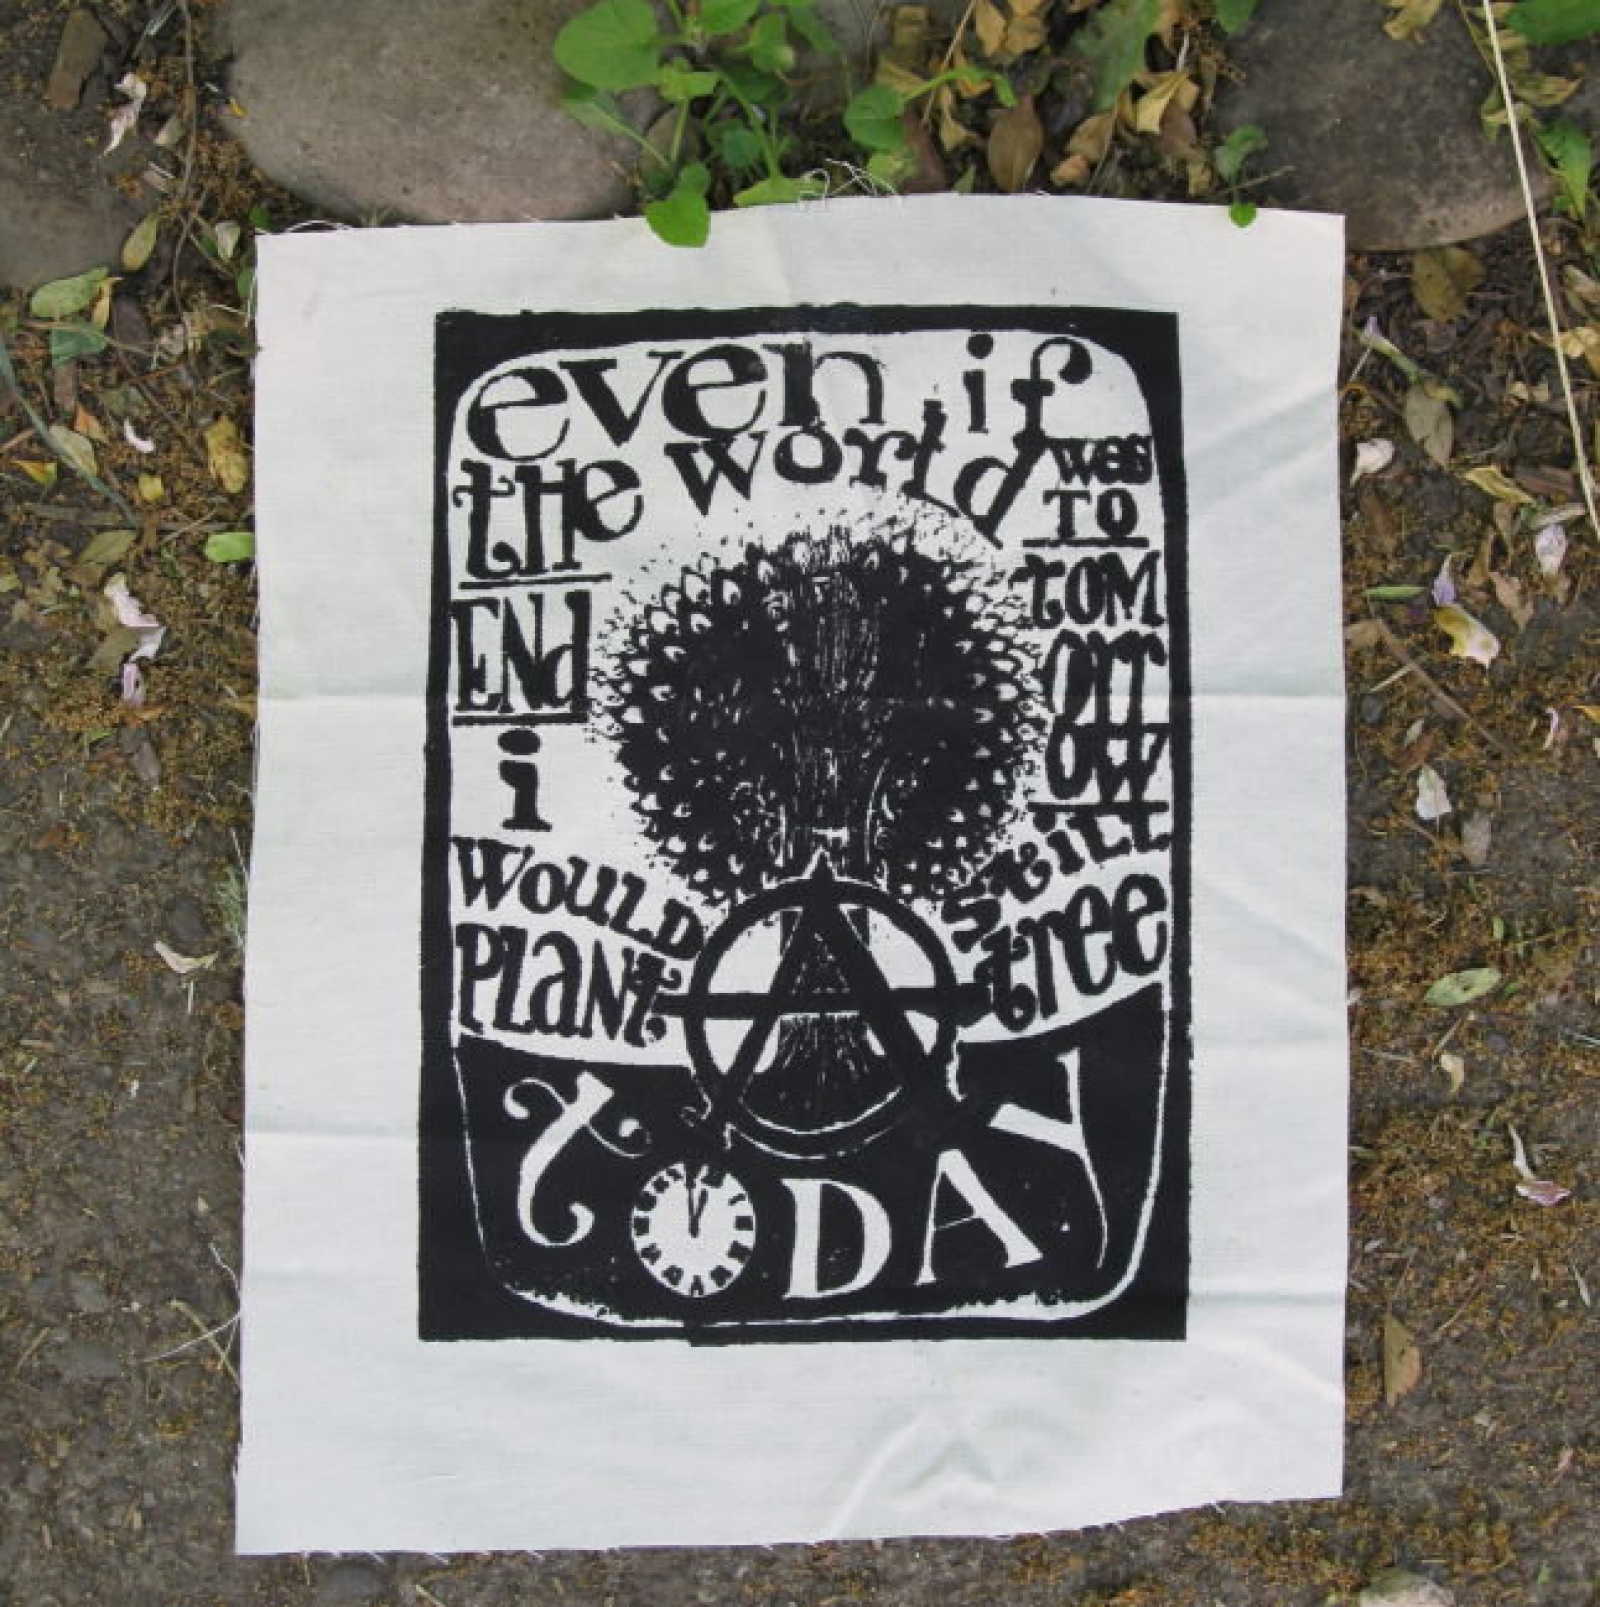 Punk Patch, Even if the World Ended Tommorrow, I Would Still Plant a Tree  Today - Large Back or Bag Patch Screenprint WHITE